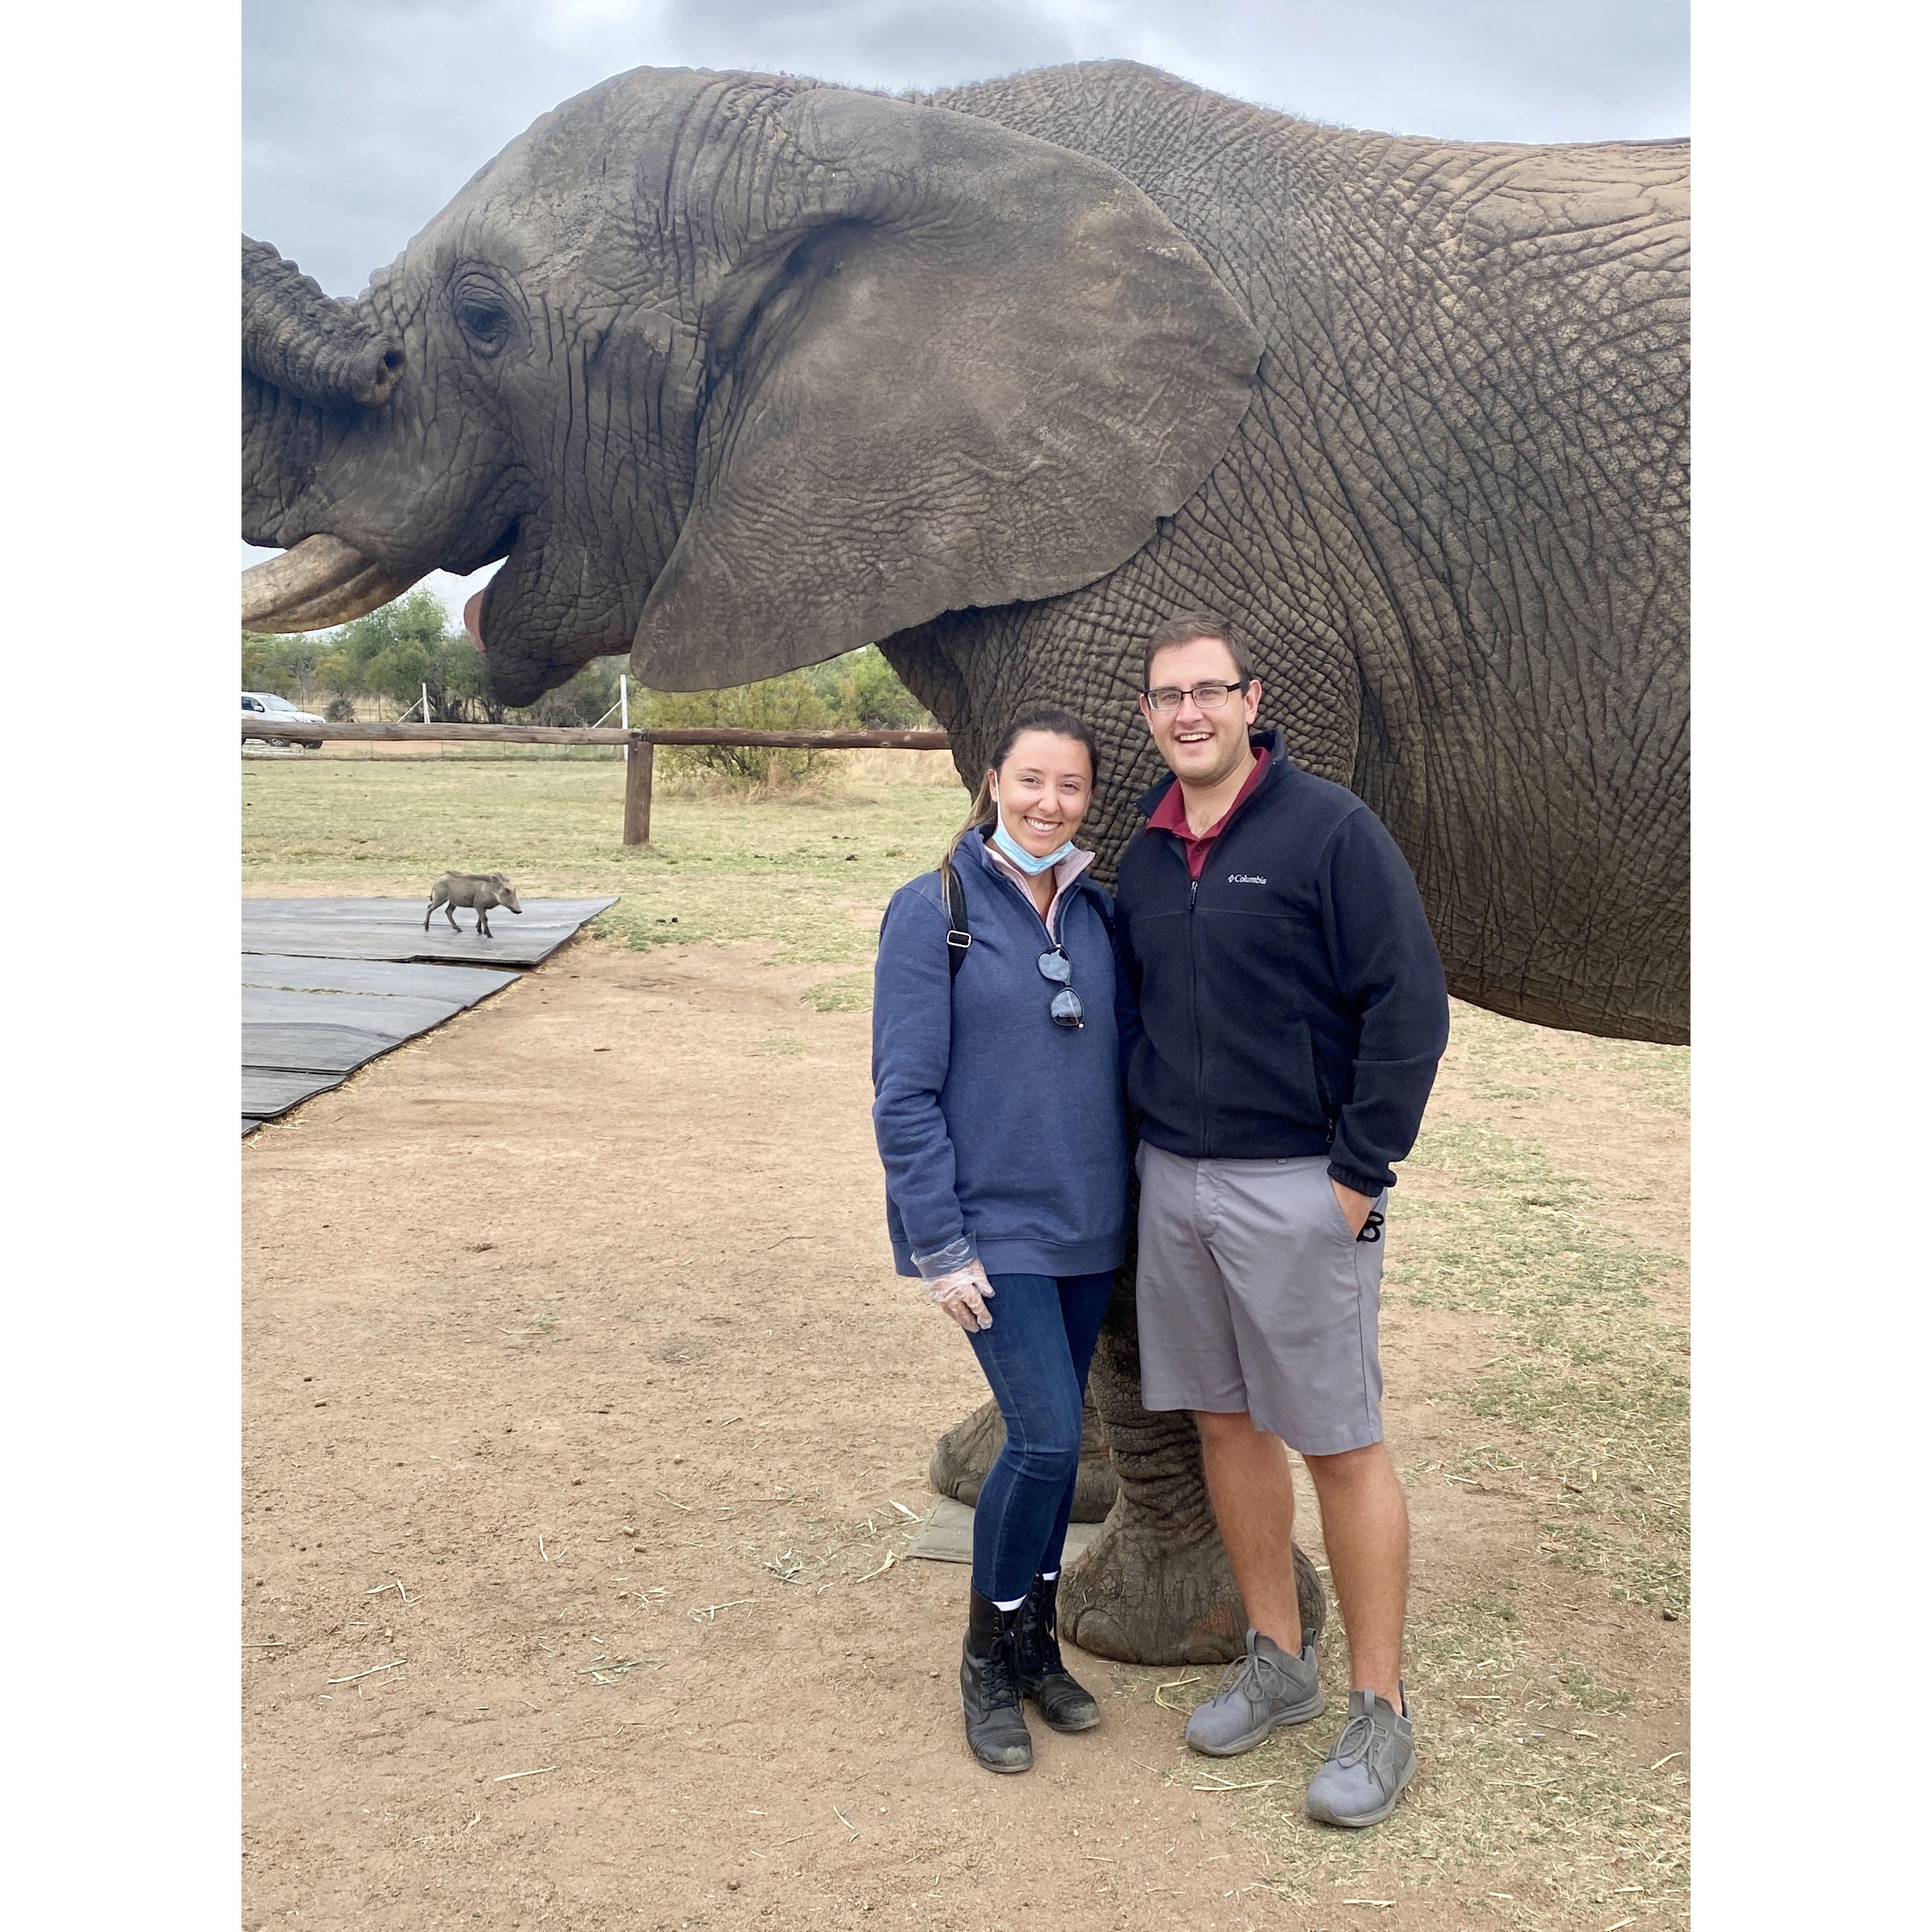 Jordan travels with Fred and his family back to his homeland of South Africa! She is blown away by the size of the African Elephants!